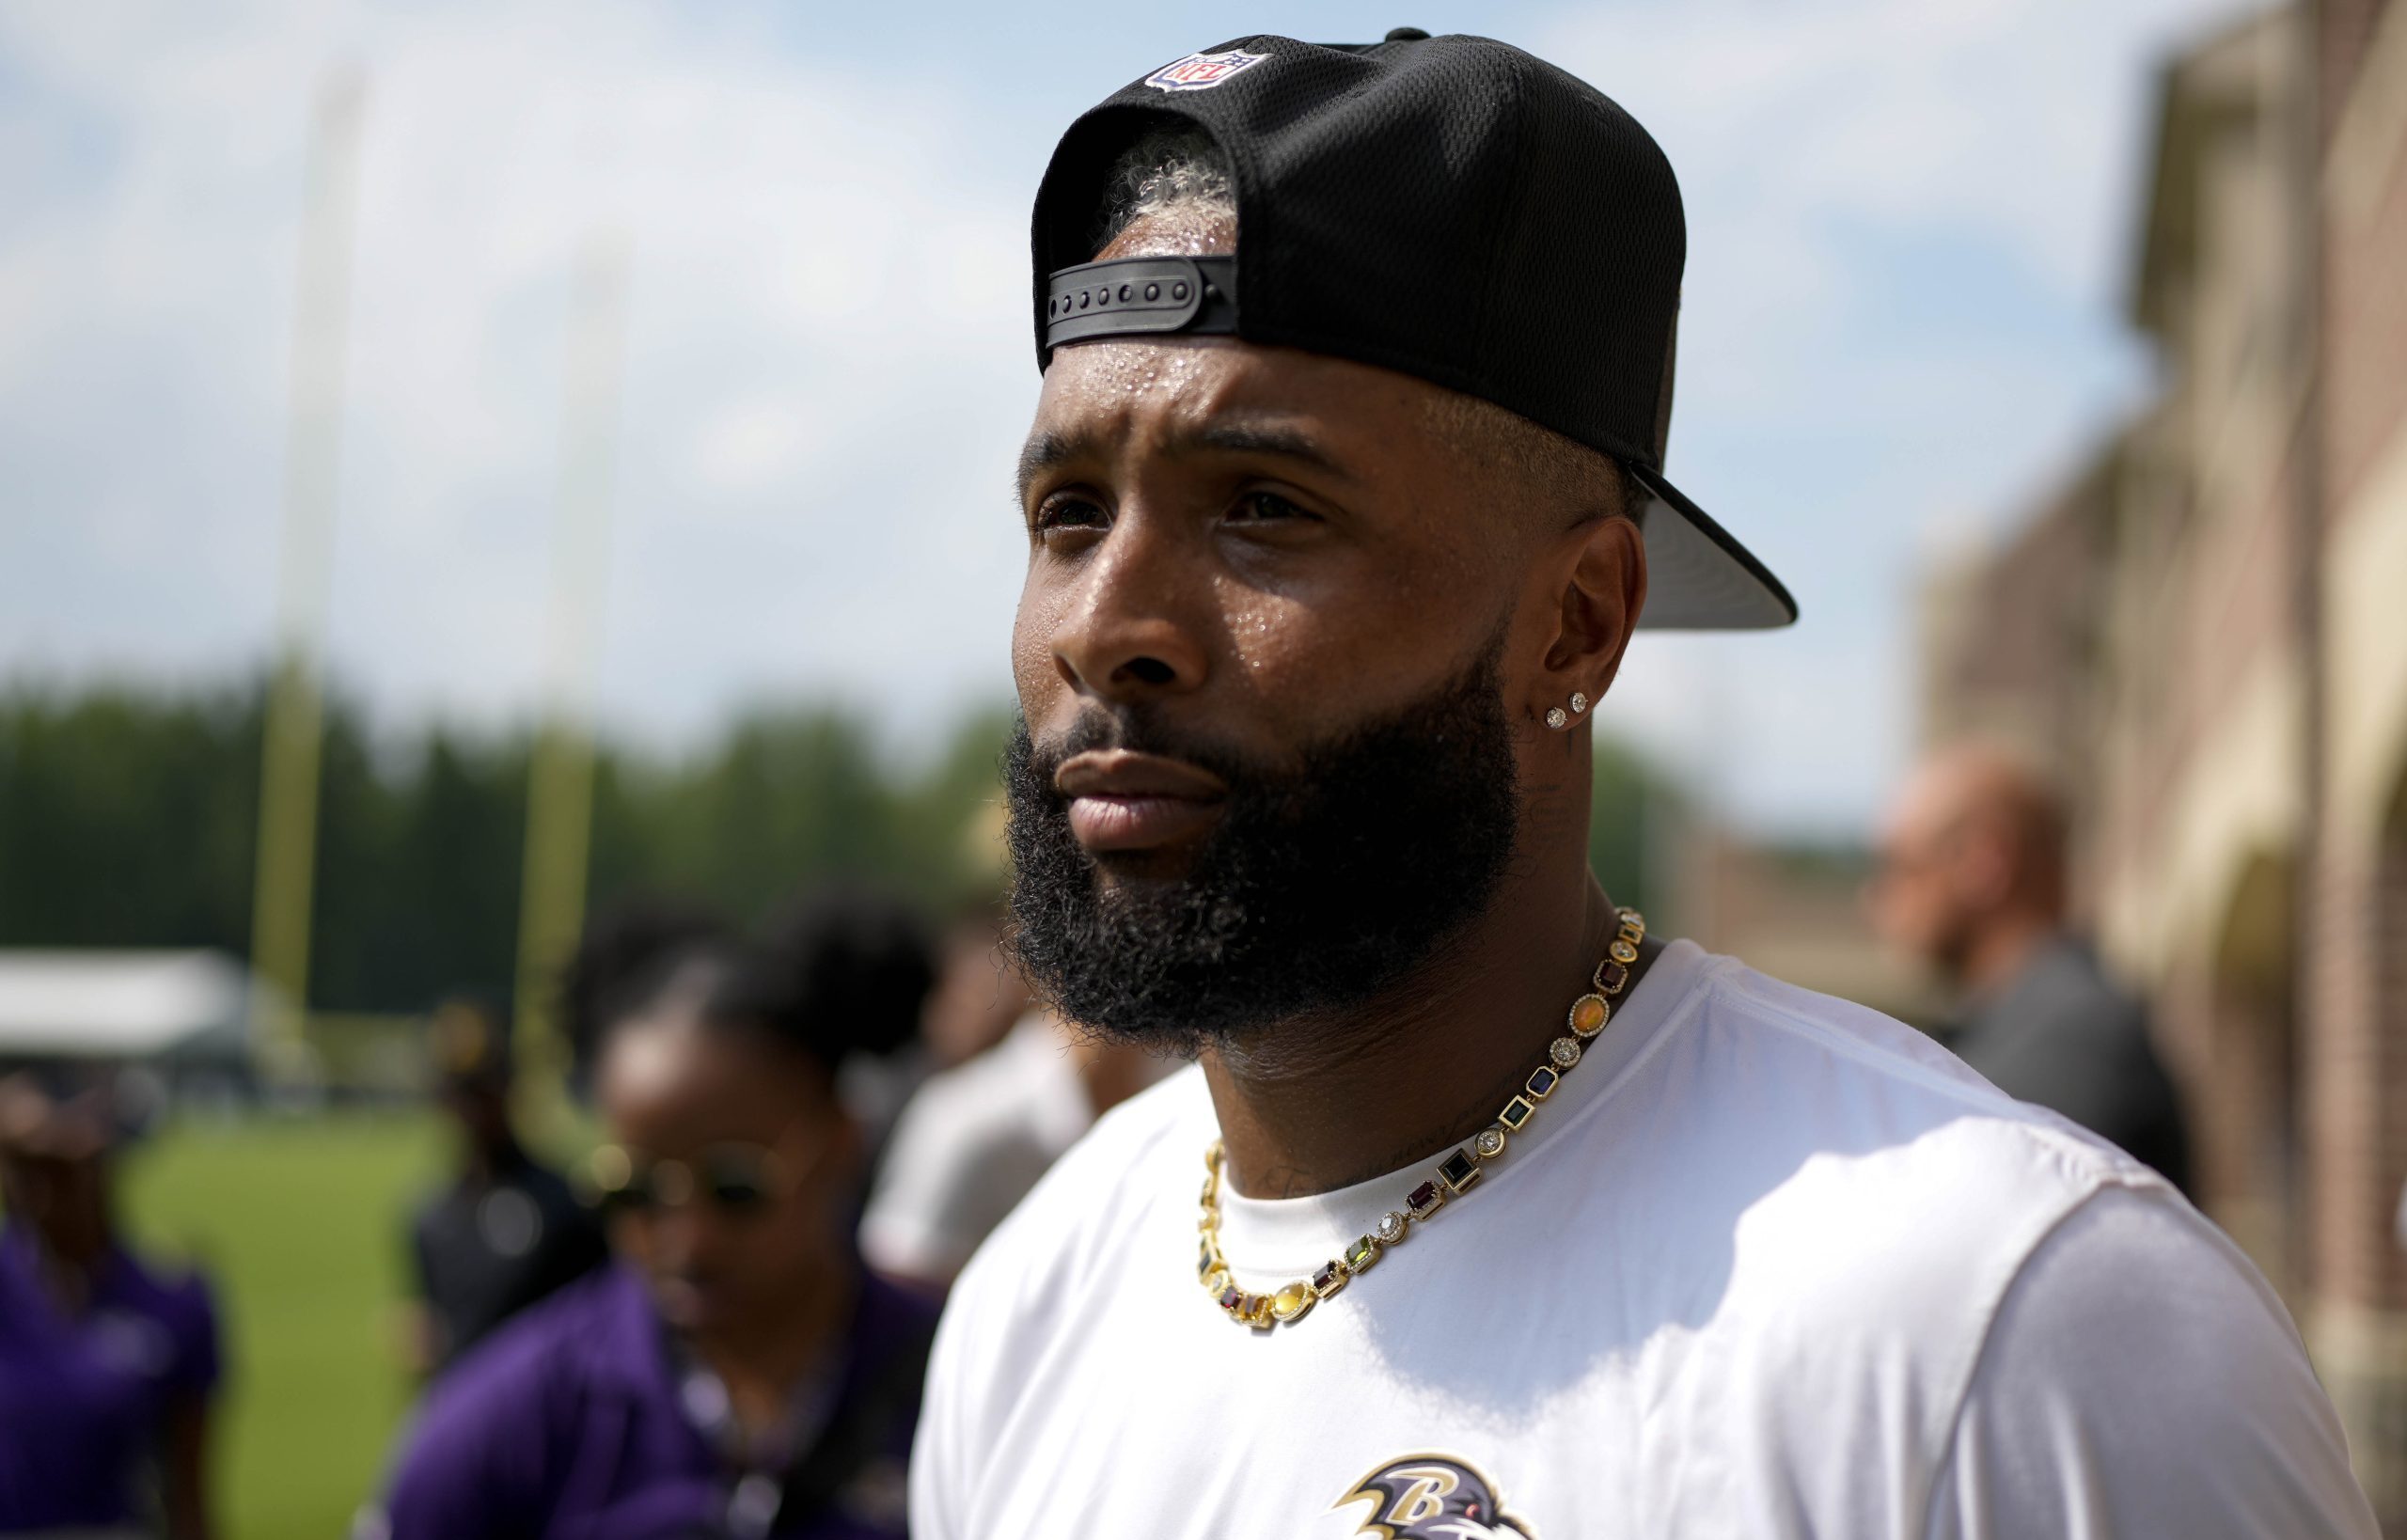 Jul 27, 2023; Owings Mills, MD, USA; Baltimore Ravens wide receiver Odell Beckham Jr. (3) walks after signing autographs following training camp practice at Under Armour Performance Center. Mandatory Credit: Brent Skeen-USA TODAY Sports